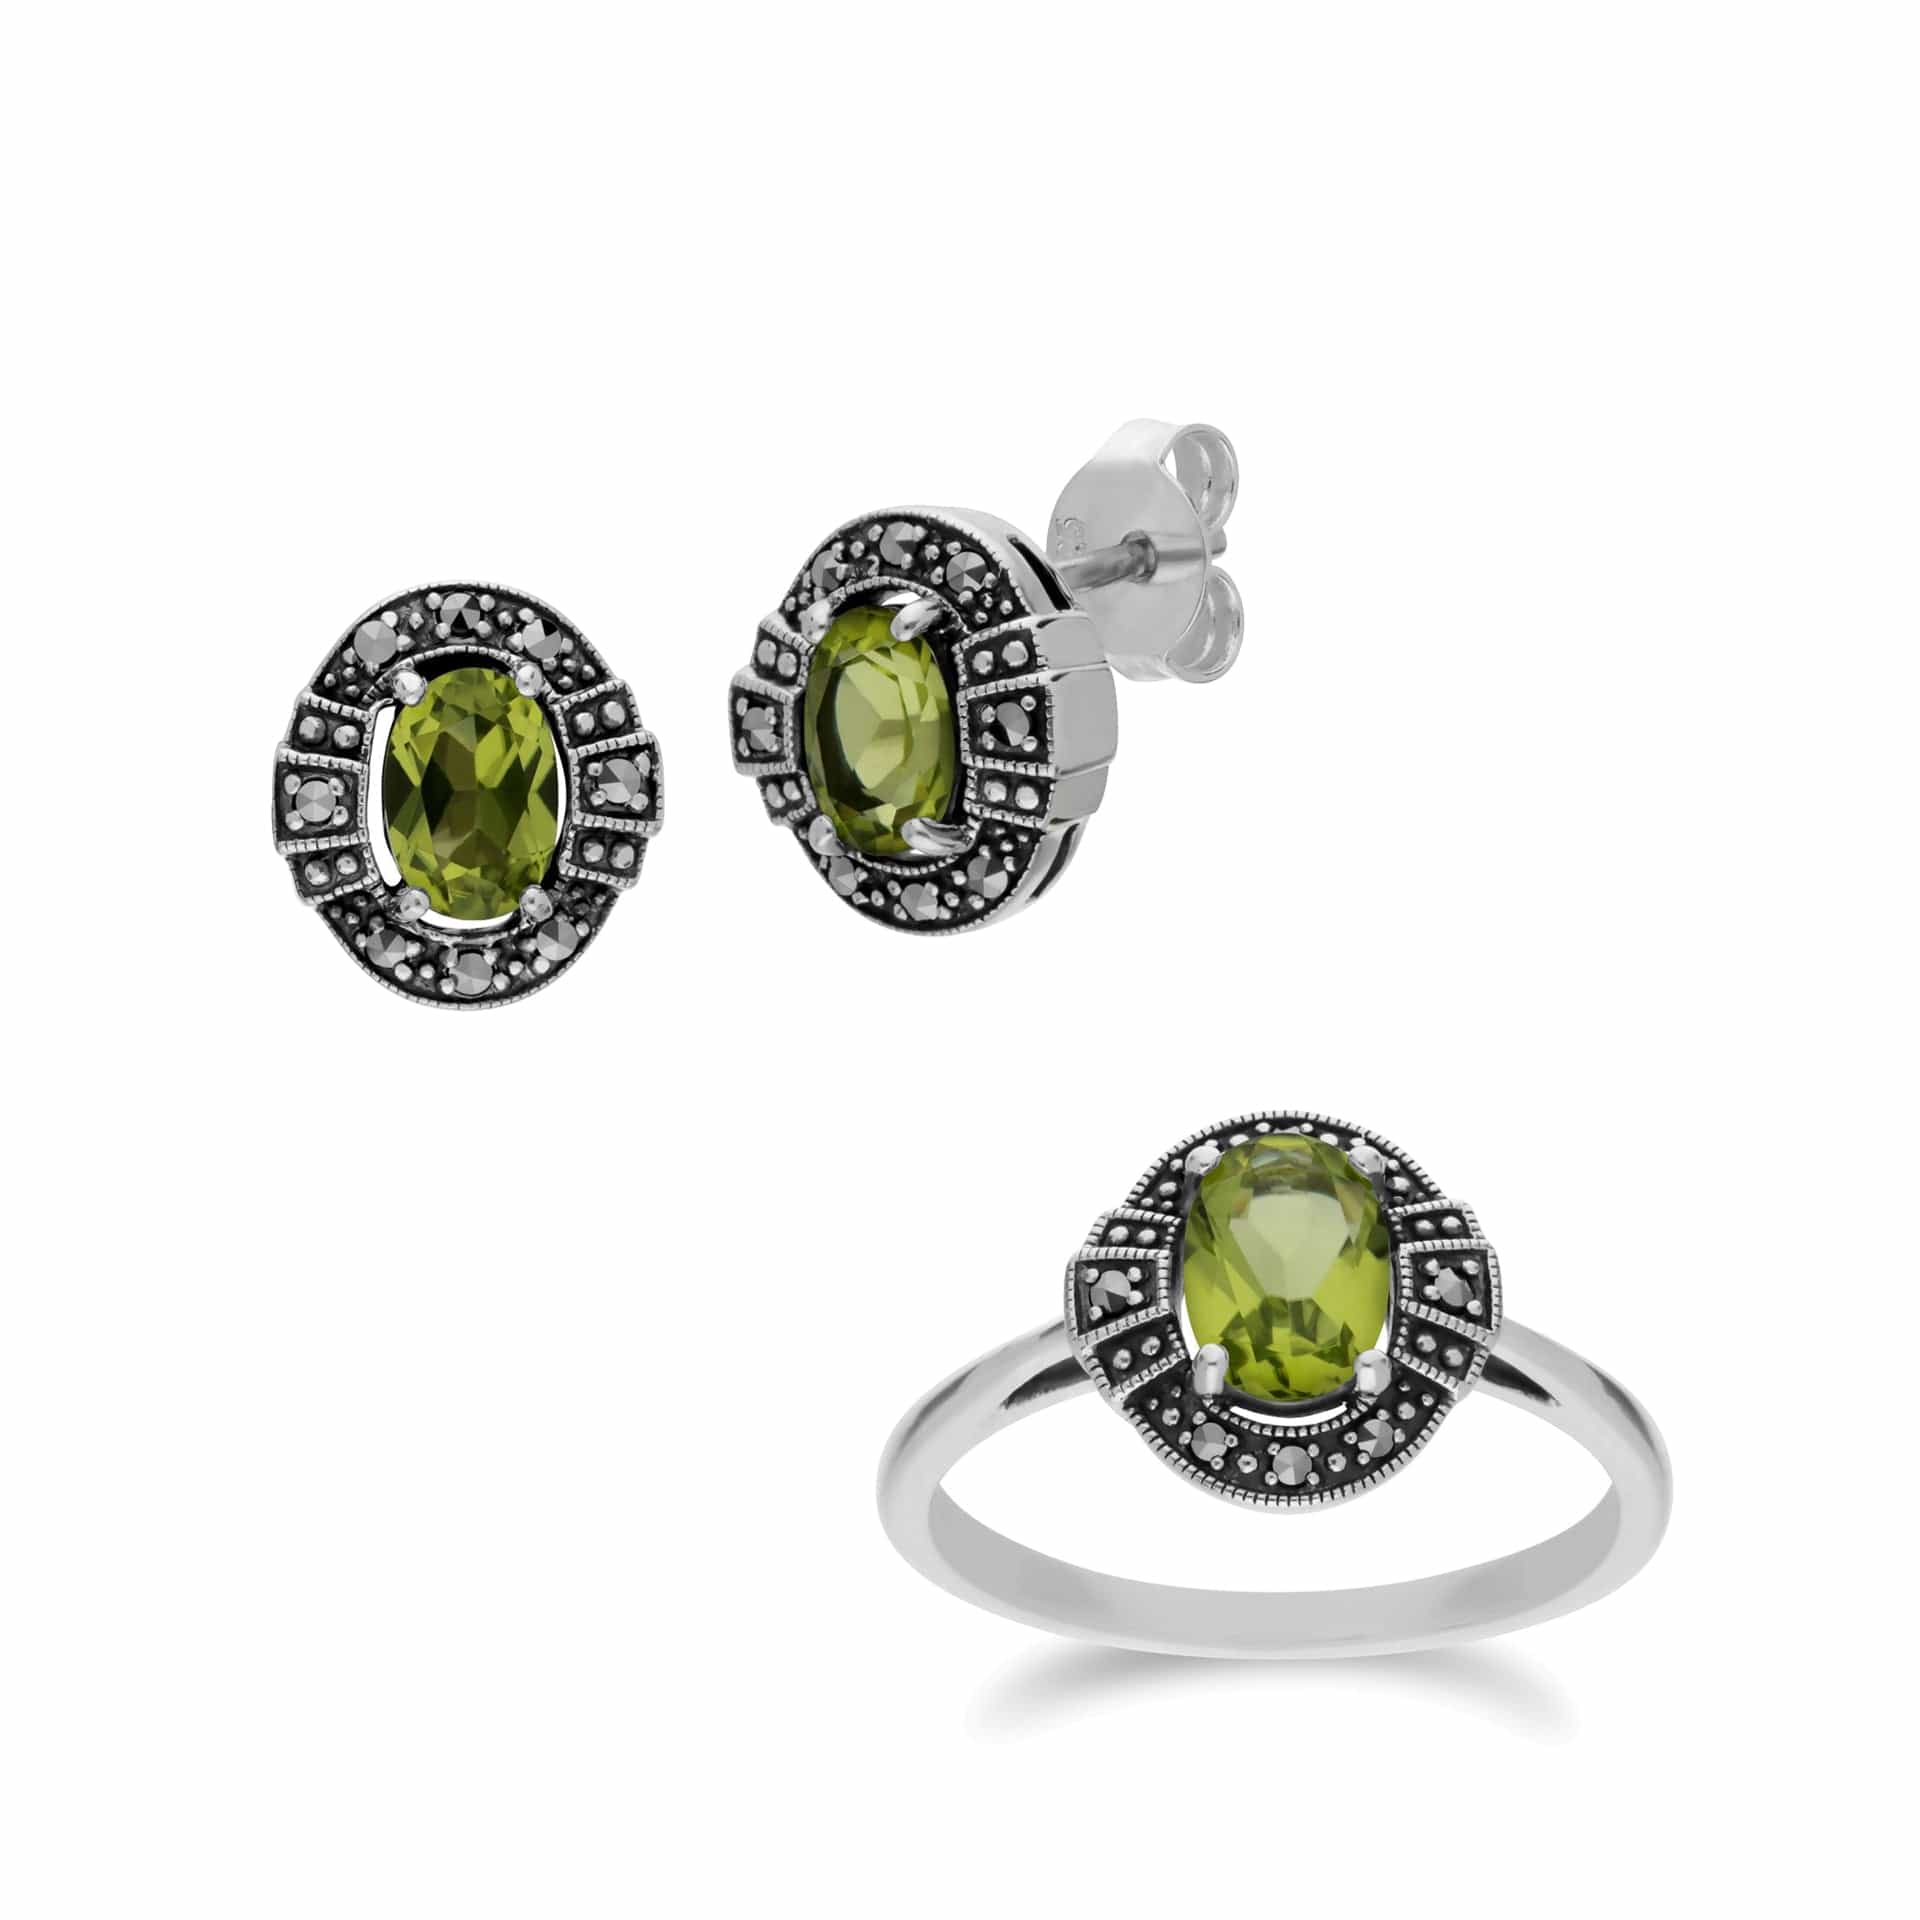 214E873004925-214R605704925 Art Deco Style Oval Peridot and Marcasite Cluster Stud Earrings & Ring Set 1